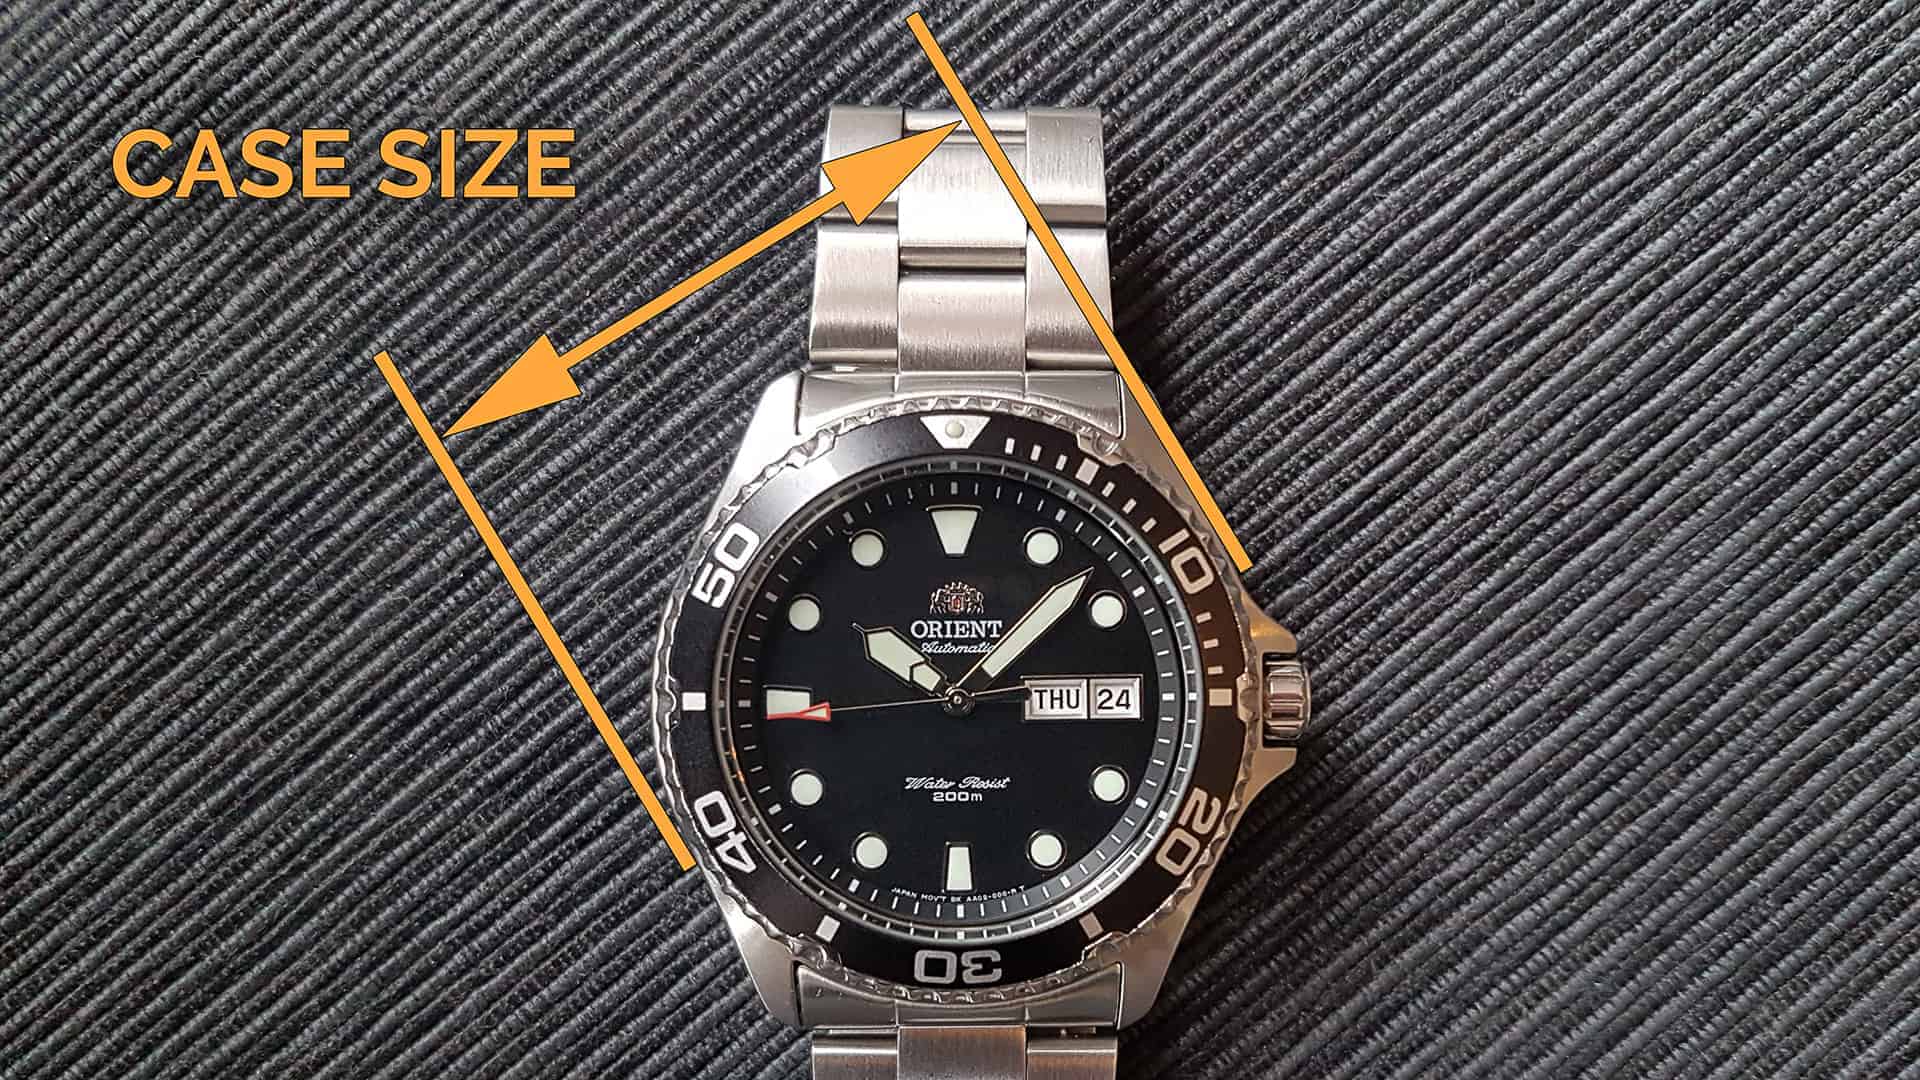 How to measure the watch case size?